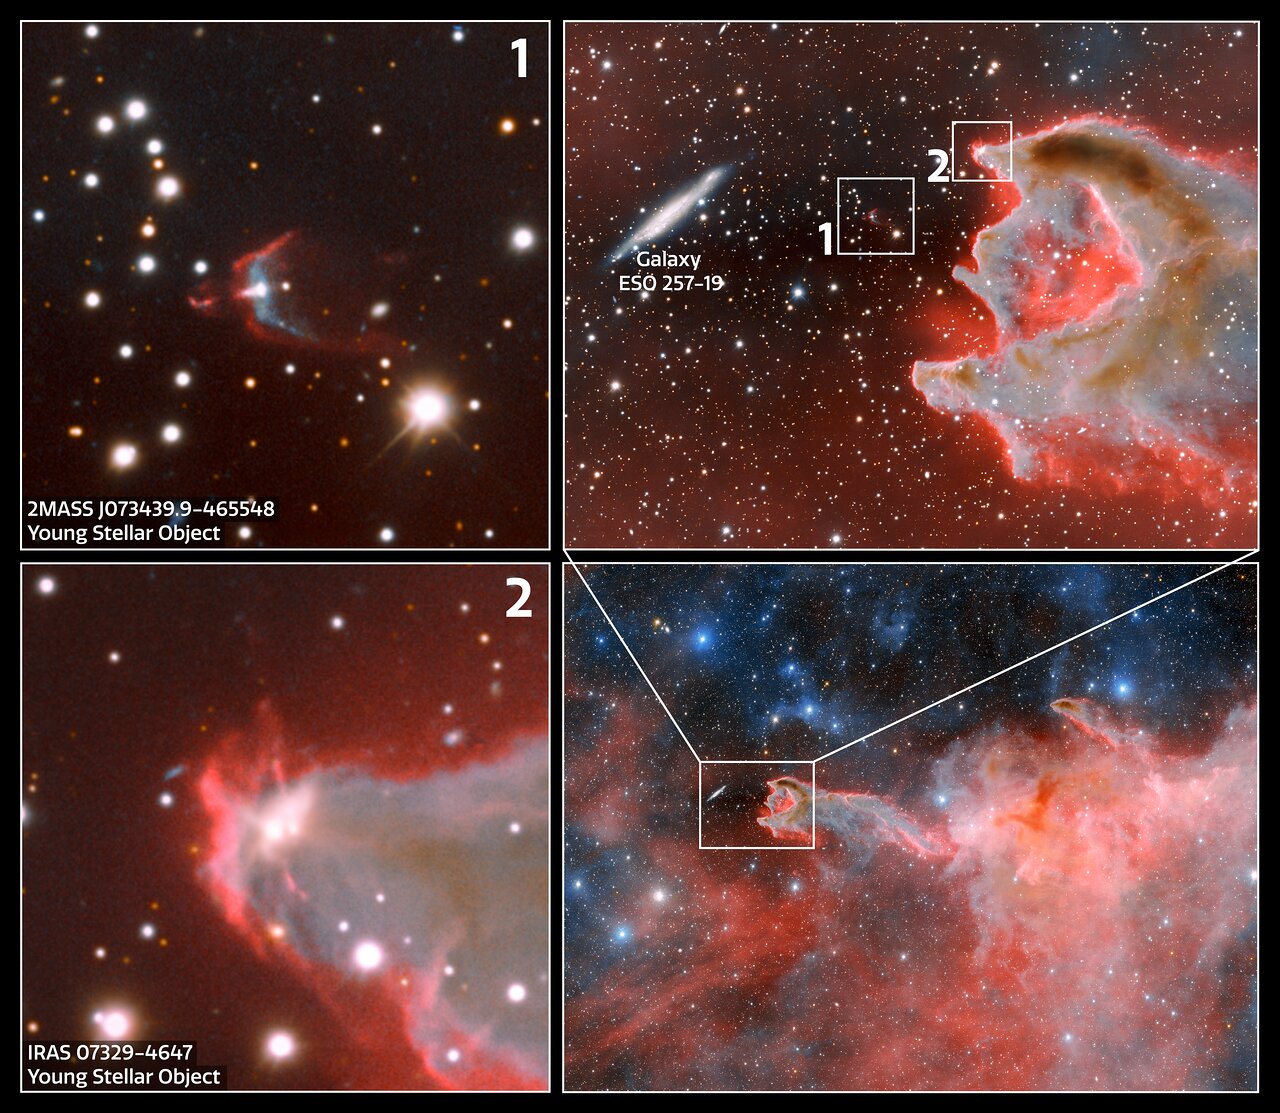 Zoomed in diagrams of God's hand. The first panel shows a zoomed in view of young stellar object 2MASS J073439.9-465548. The second panel shows God's Hand next to Galaxy ESO 257-19. The third panel shows a zoomed in view of a second young stellar object., IRAS 073294647.